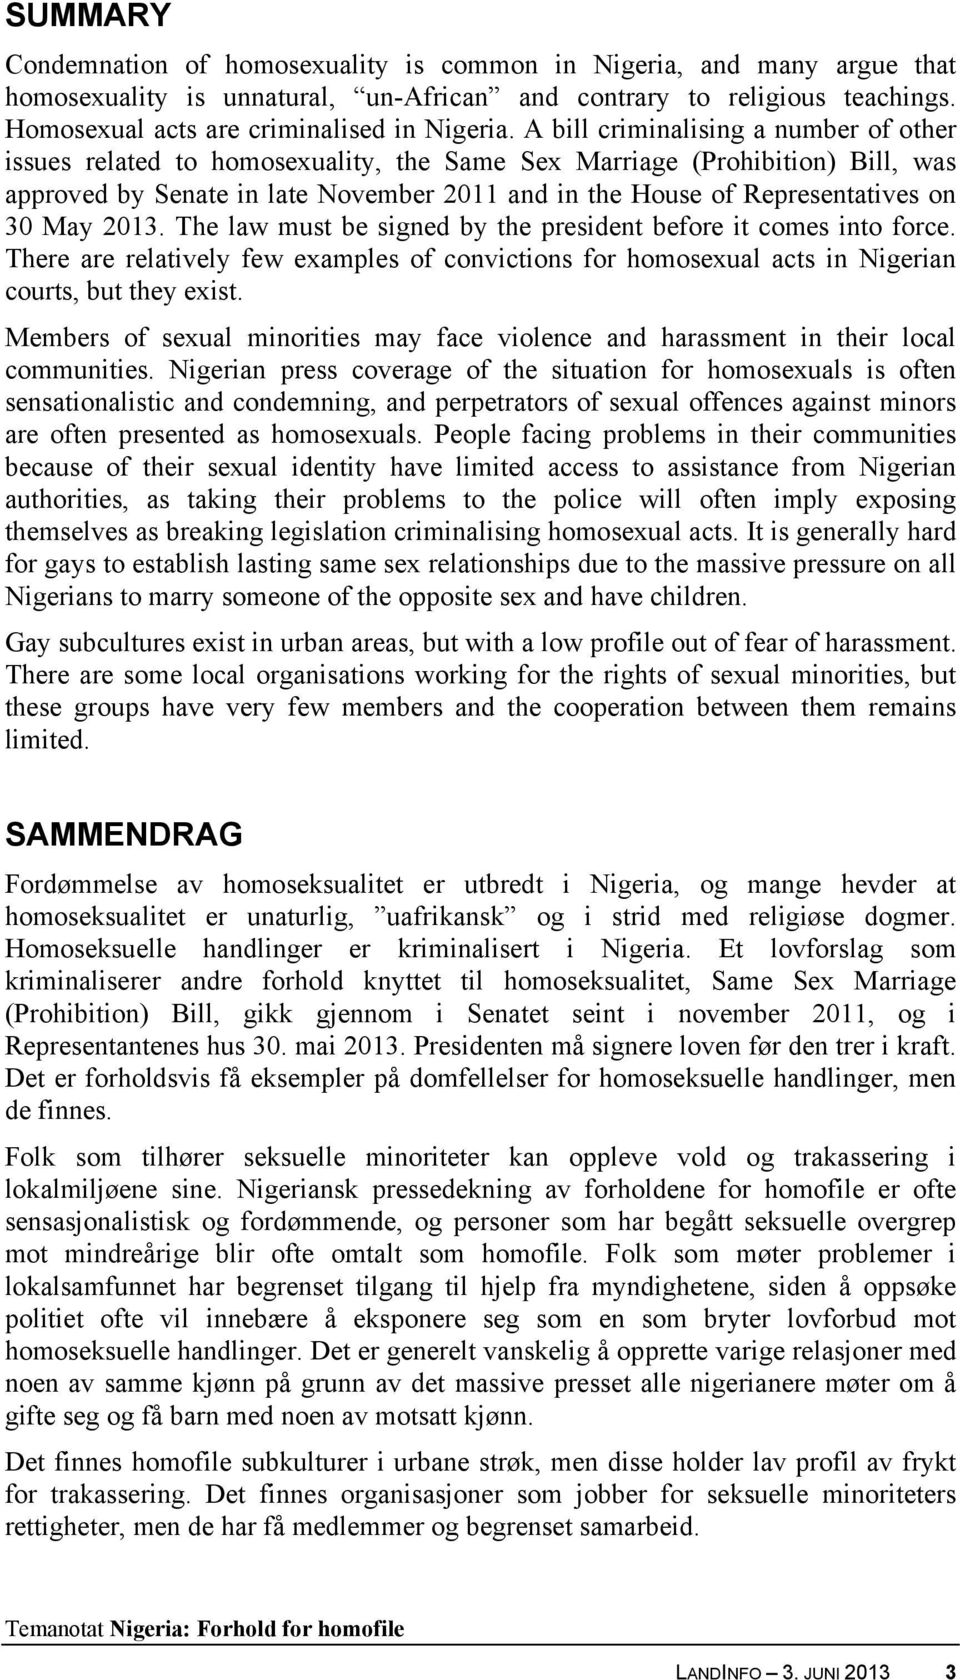 30 May 2013. The law must be signed by the president before it comes into force. There are relatively few examples of convictions for homosexual acts in Nigerian courts, but they exist.